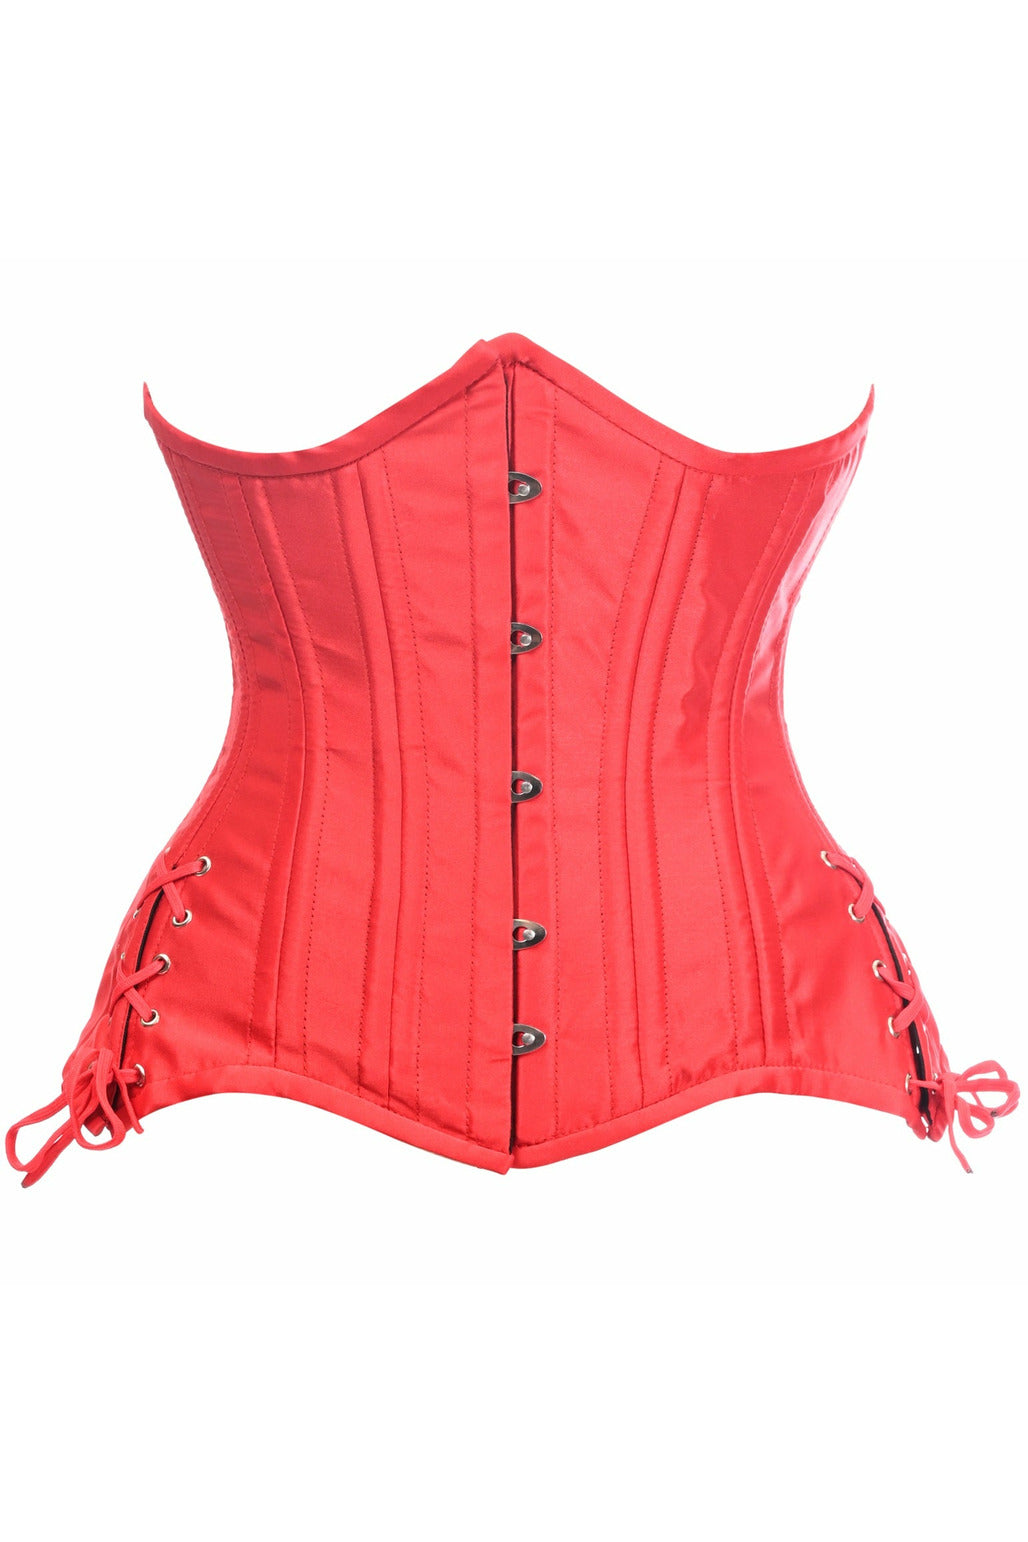 Daisy Corsets Top Drawer Red Satin Double Steel Boned Curvy Cut Waist Cincher Corset w/Lace-Up Sides